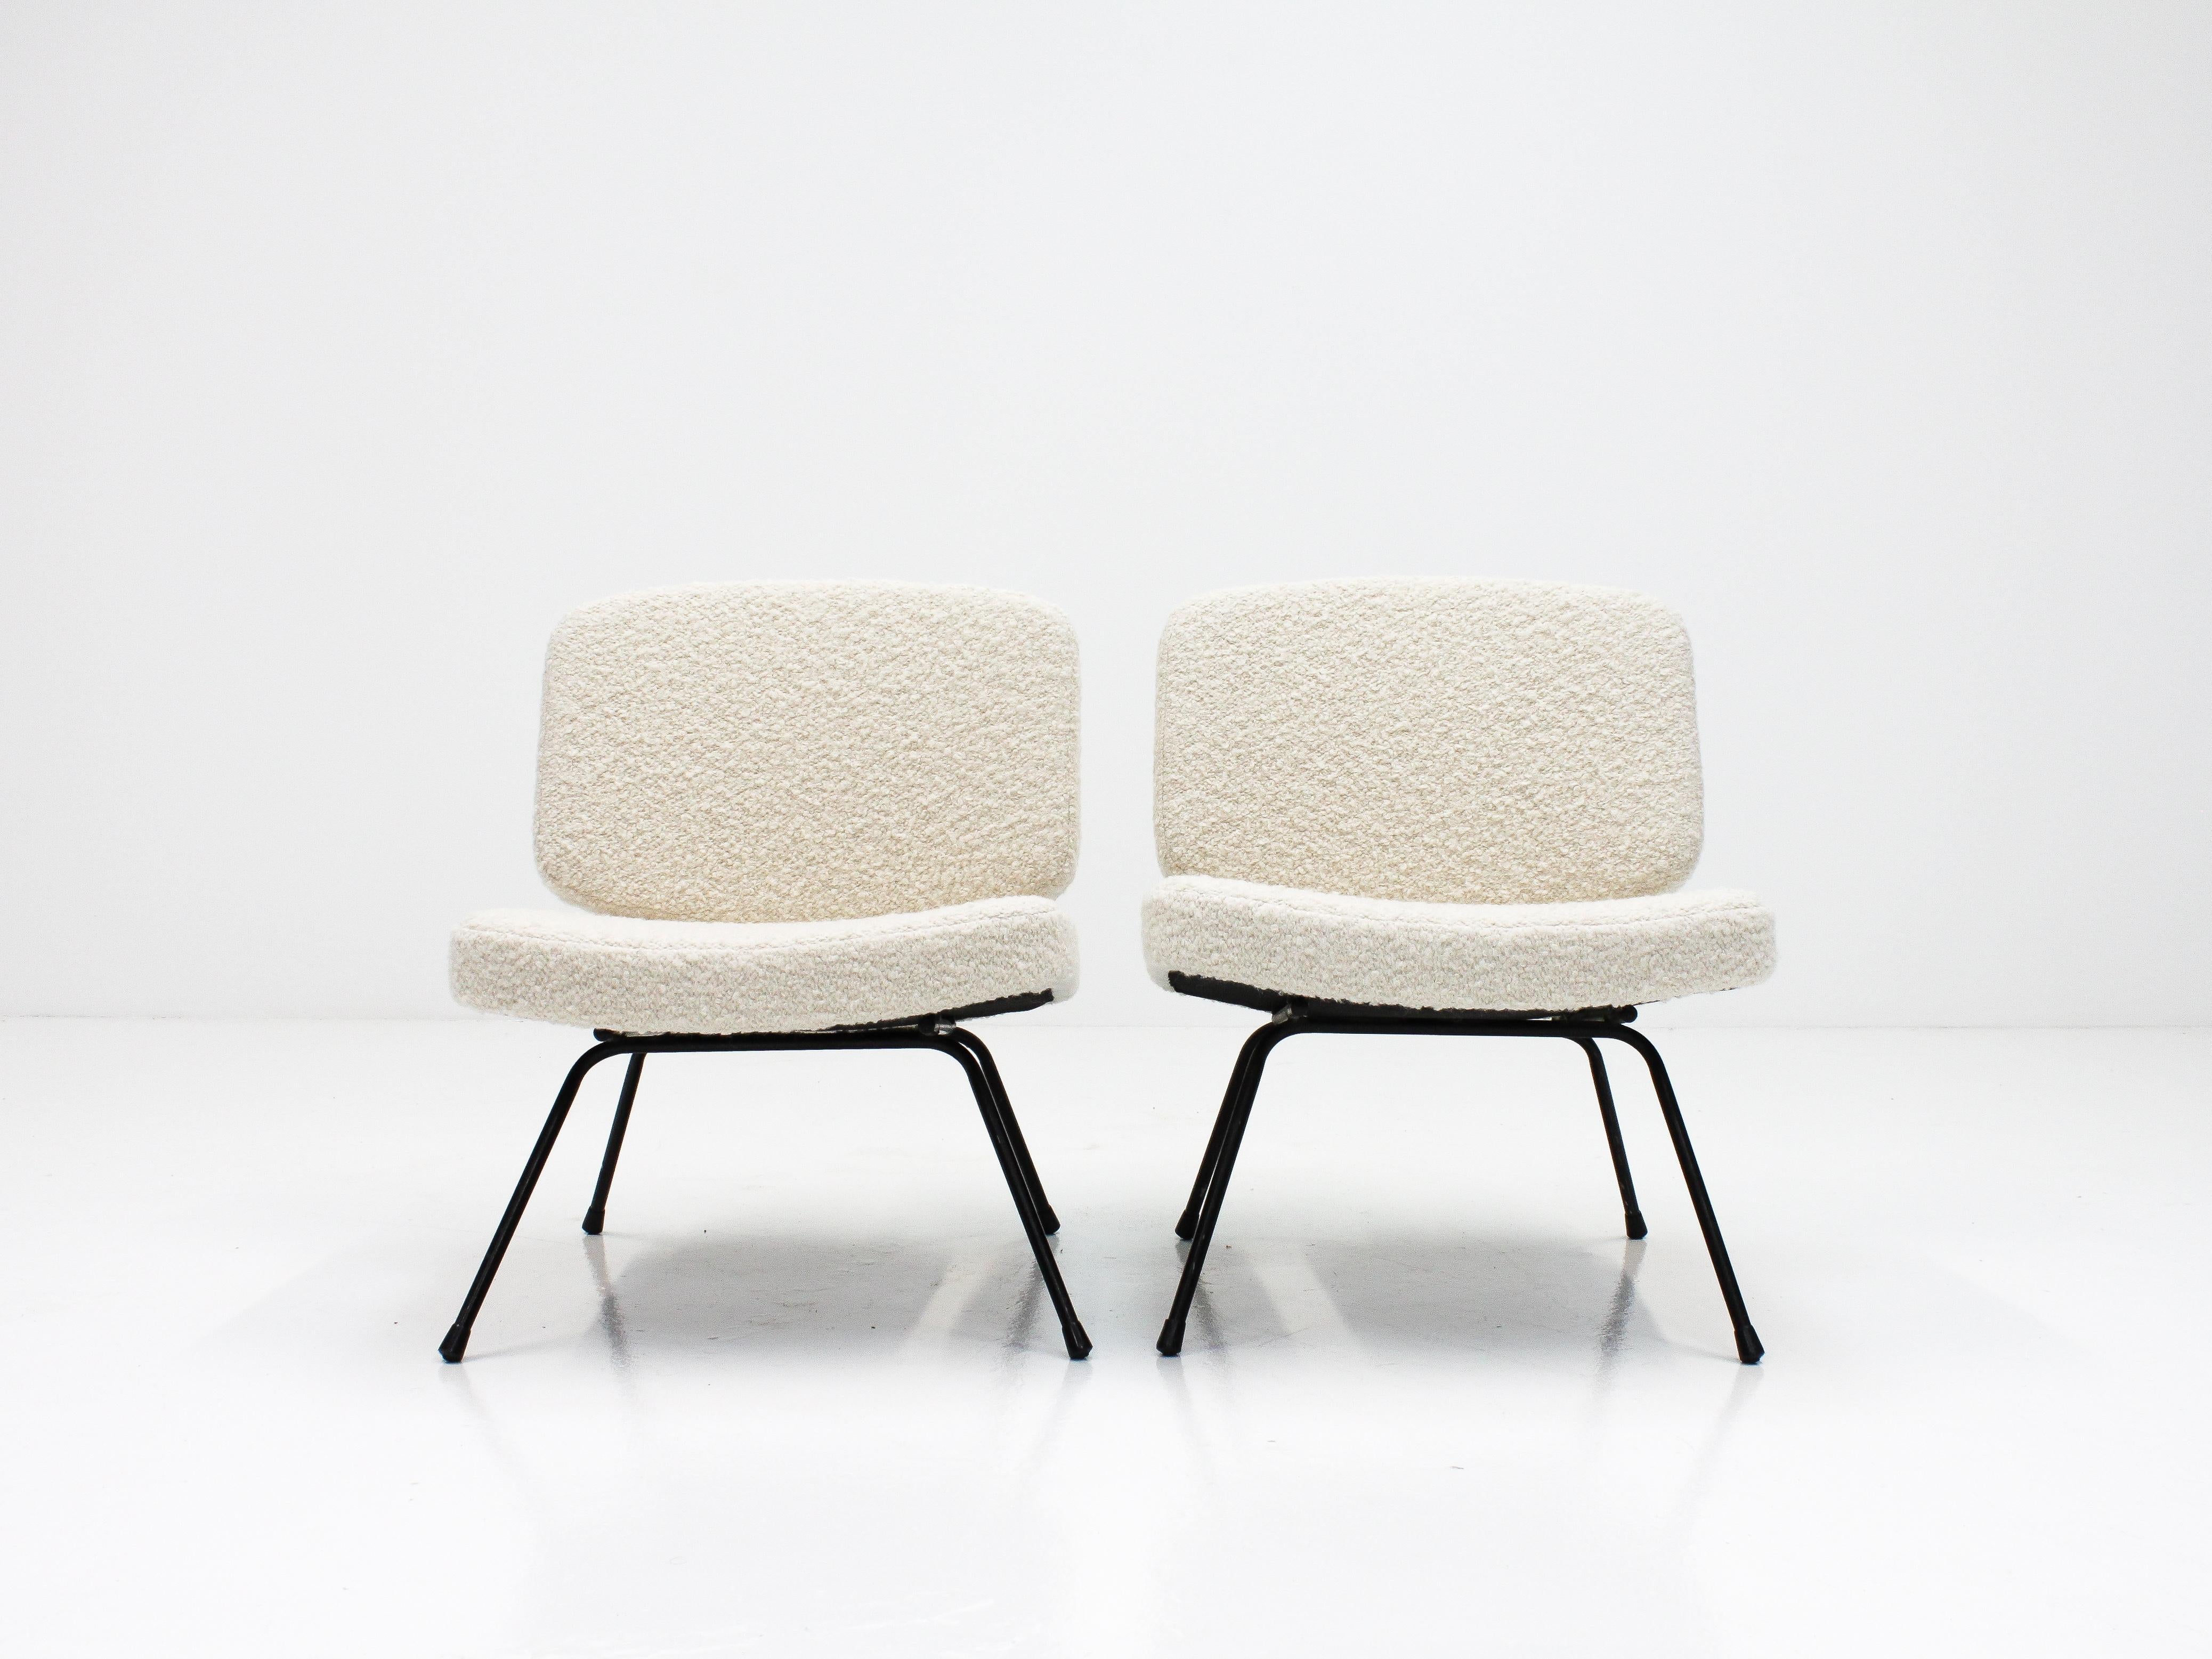 French Pair of Pierre Paulin CM 190 Lounge Chairs in Pierre Frey, Thonet, 1950s